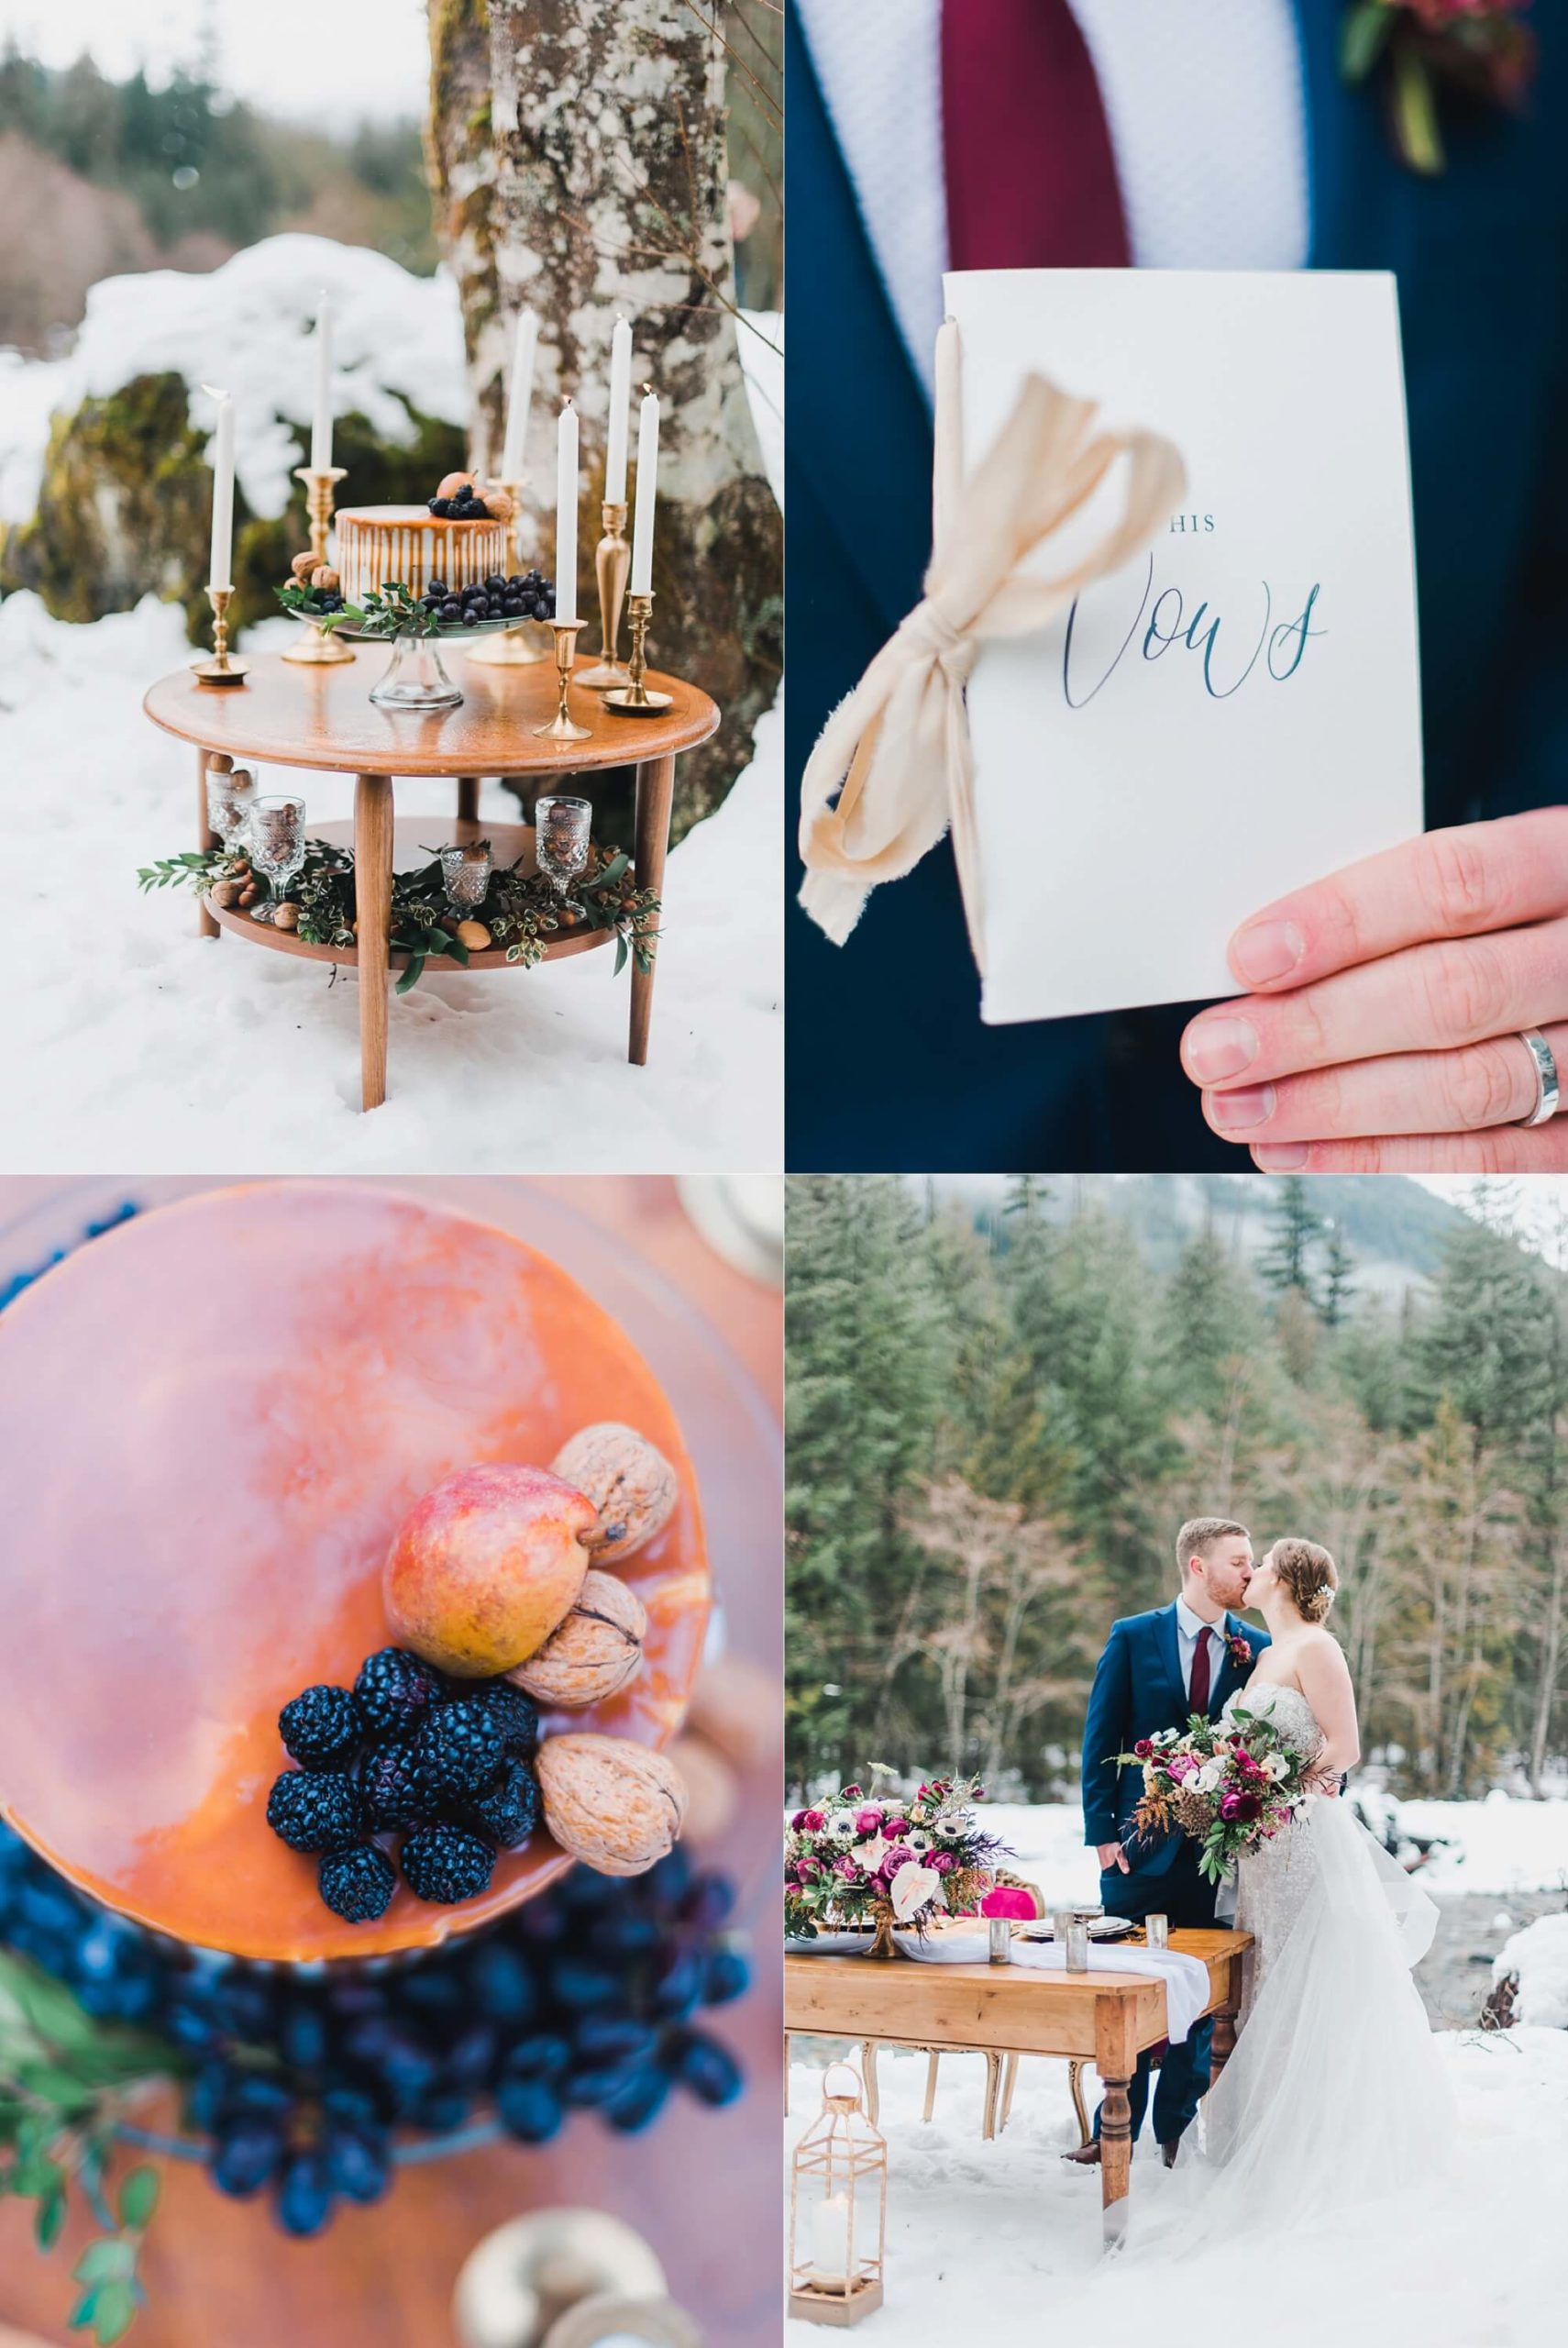 Snowy Elopement at Snoqualmie Pass